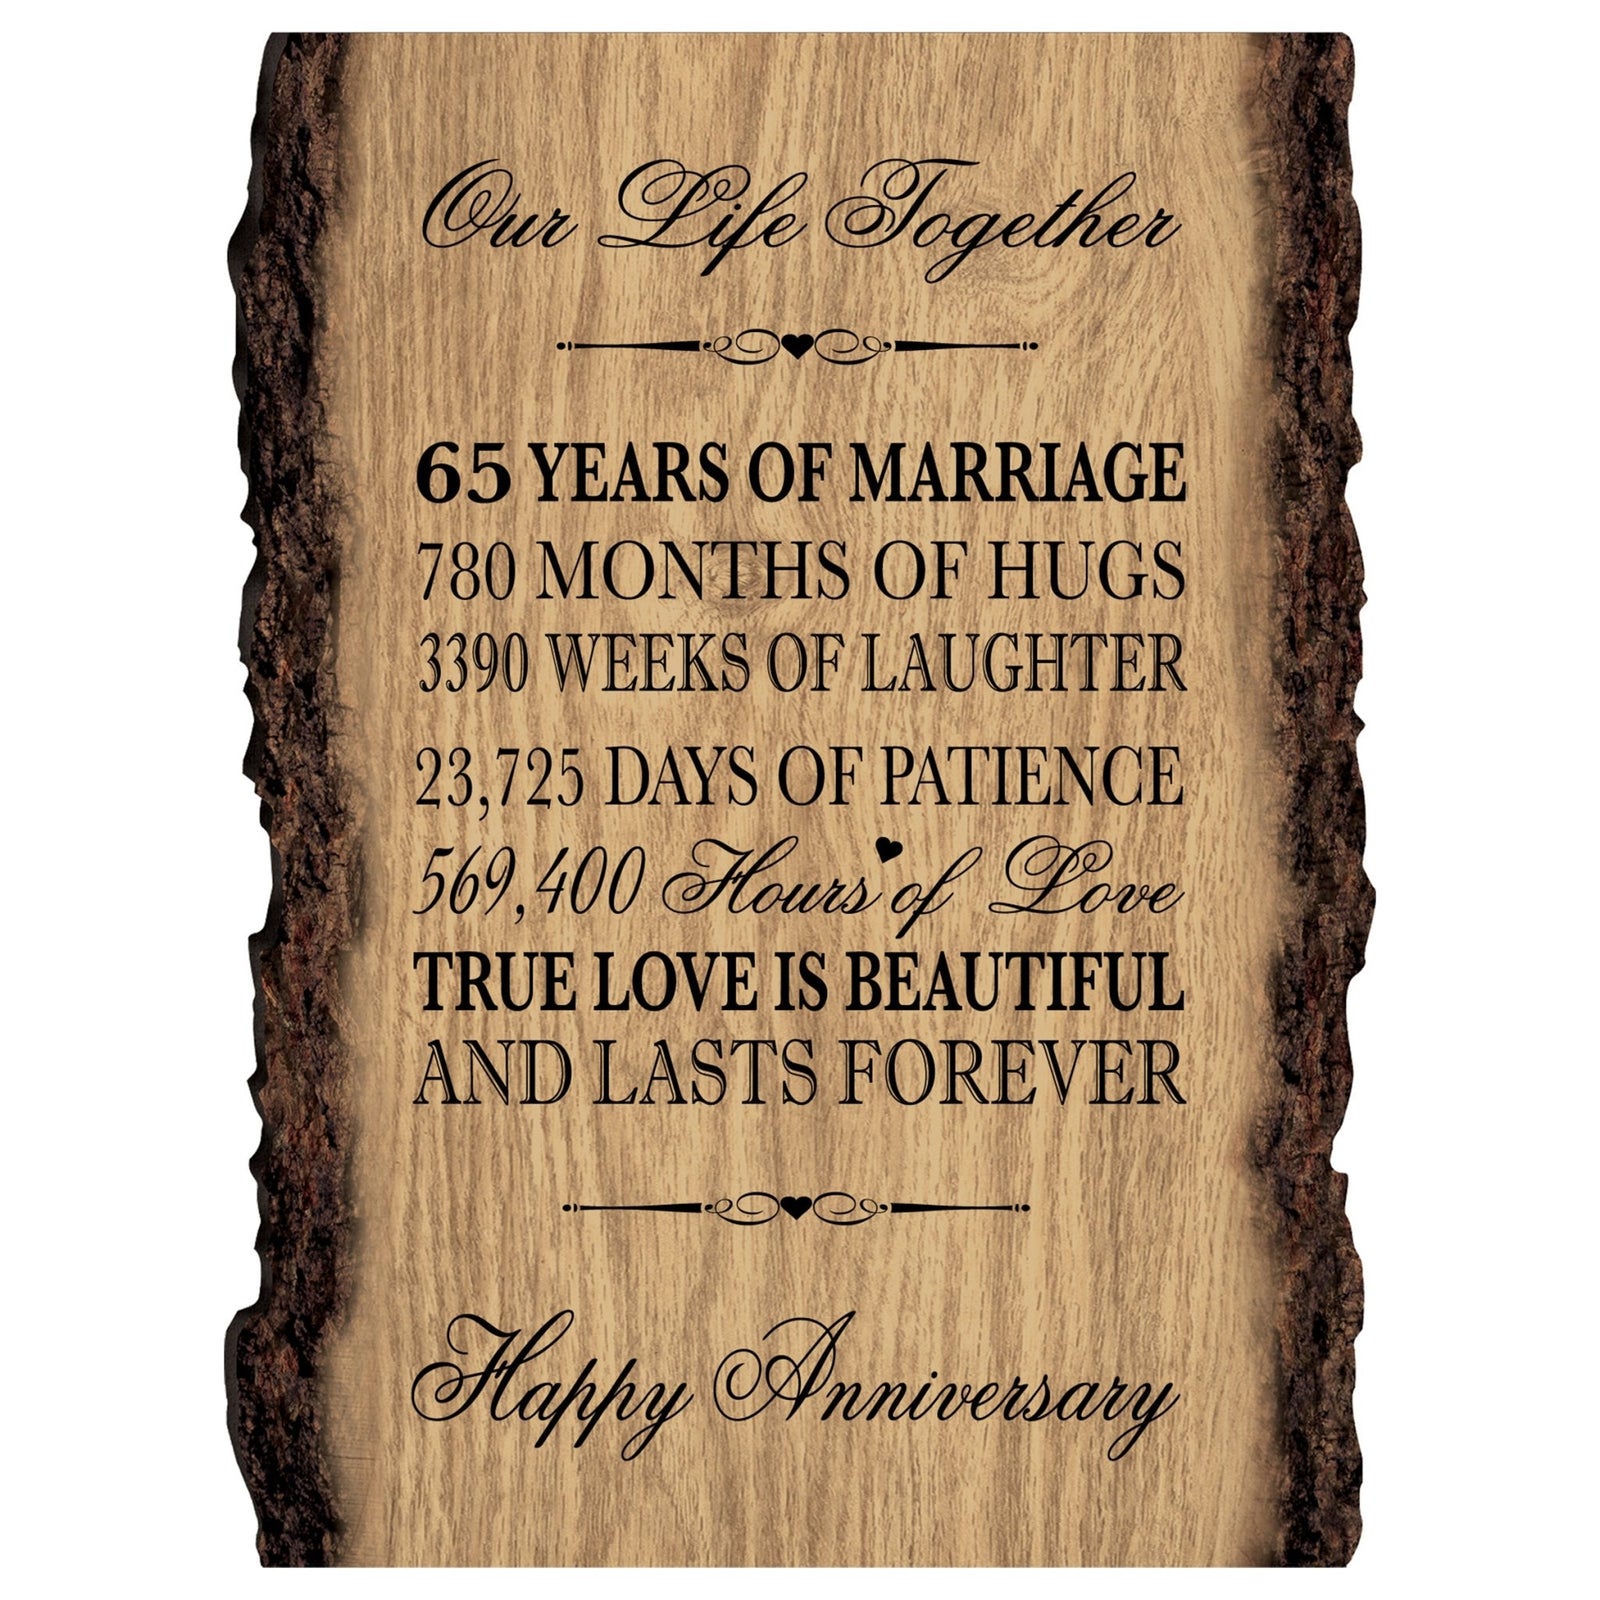 Rustic Wedding Anniversary 9x12 Barky Wall Plaque Gift For Parents, Grandparents New Couple - 65 Years Of Marriage - LifeSong Milestones